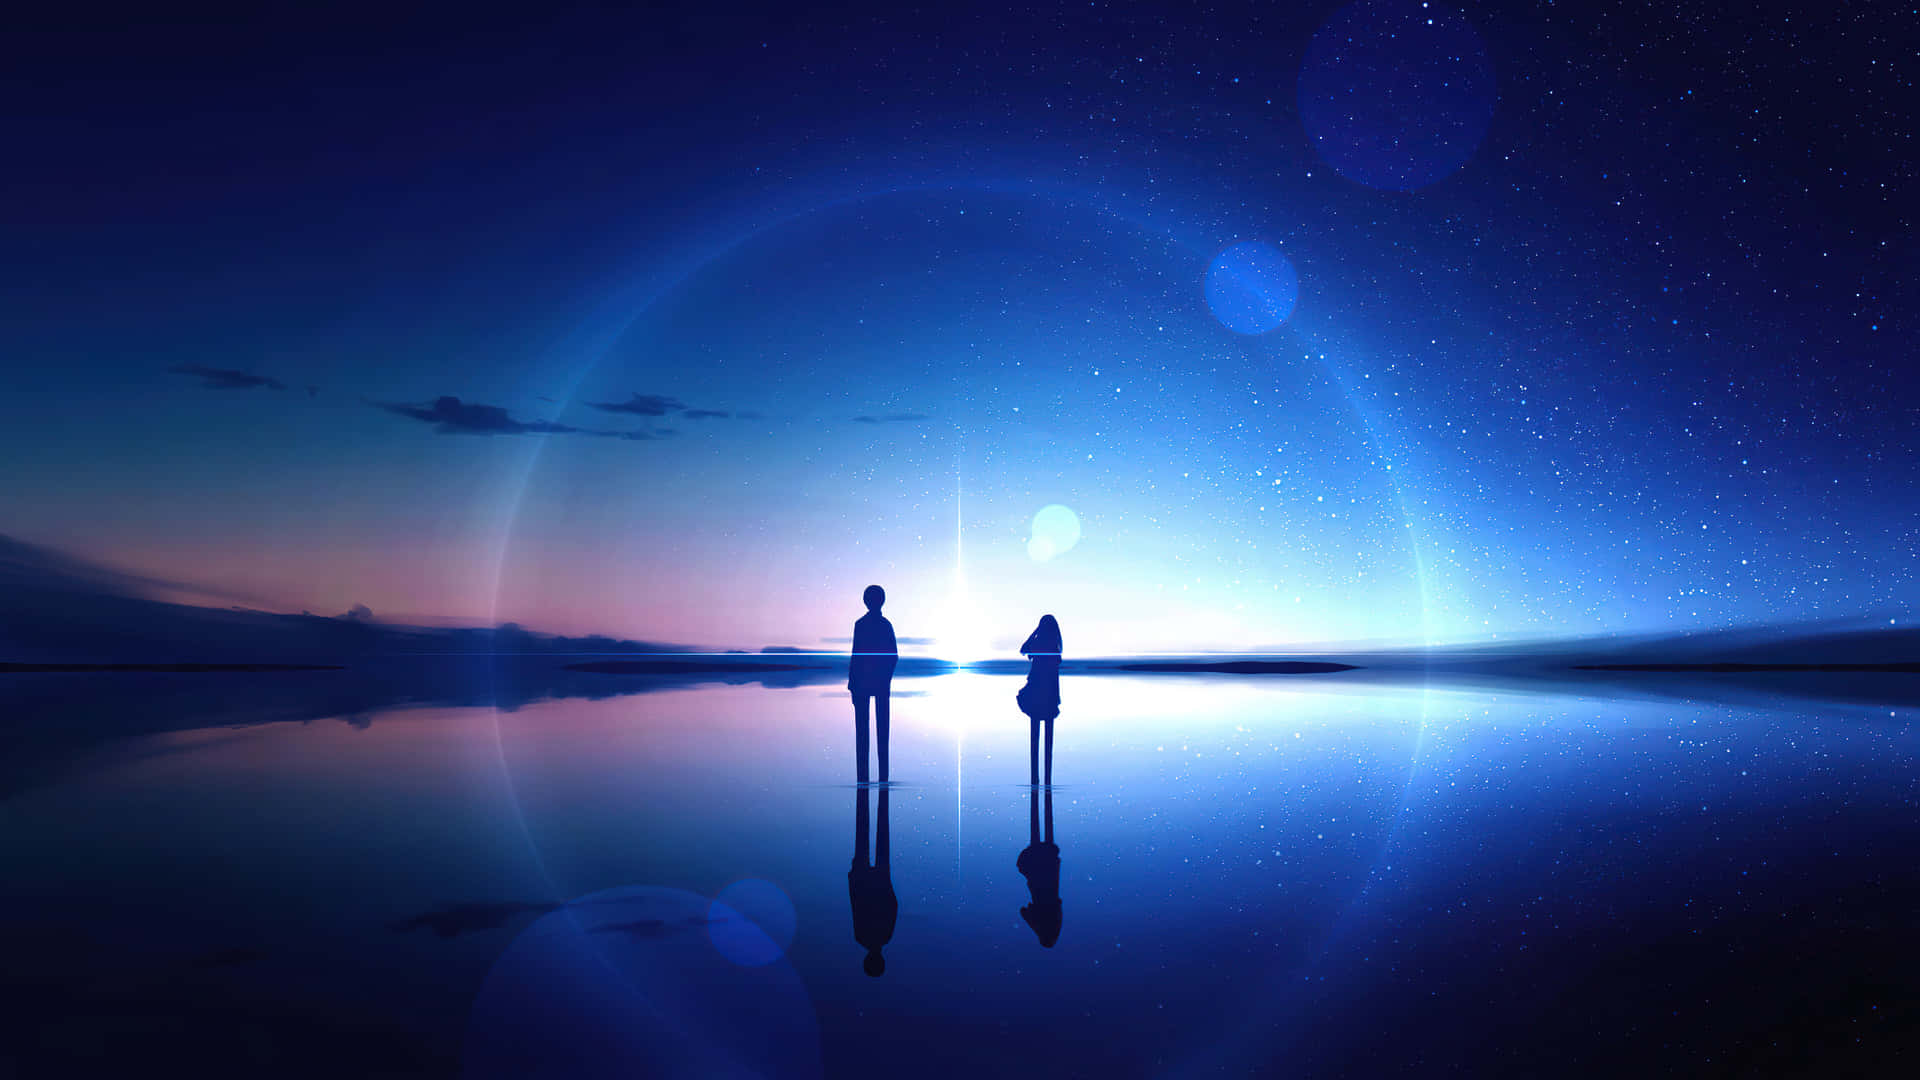 Two People Standing In The Water With A Starry Sky